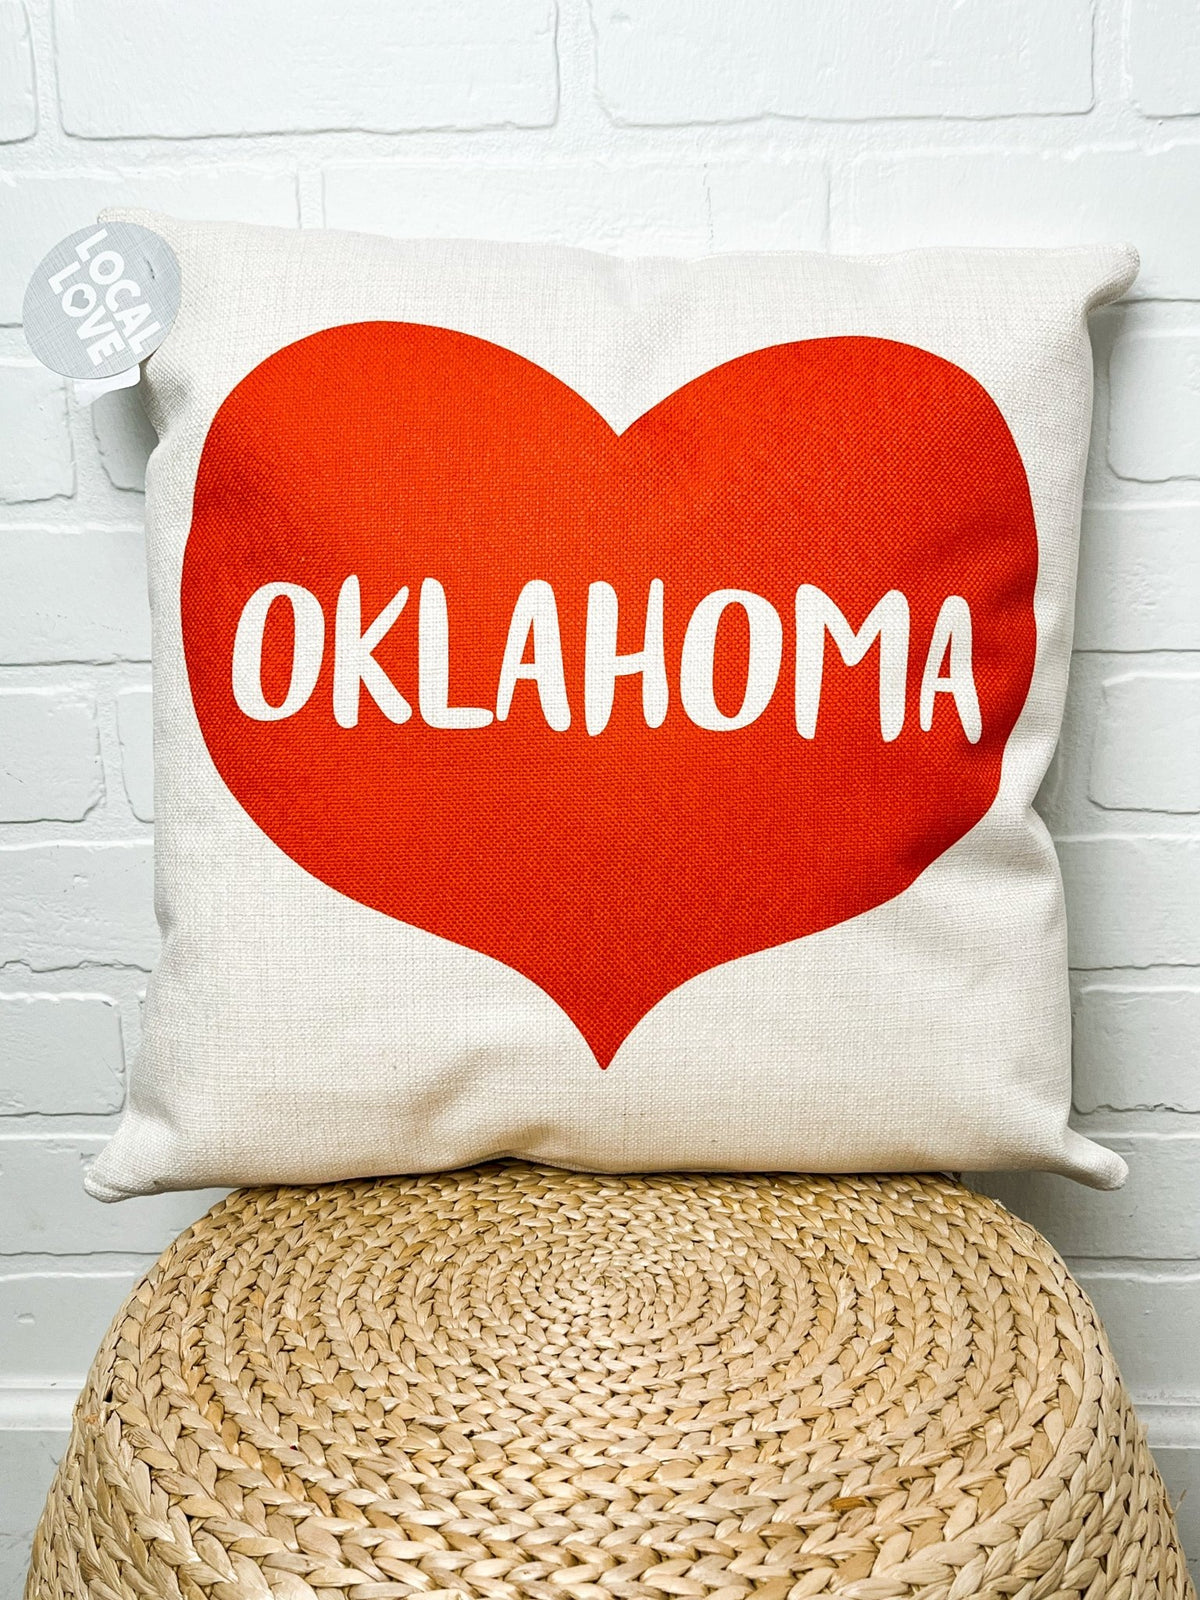 Oklahoma heart square pillow - Trendy Gifts at Lush Fashion Lounge Boutique in Oklahoma City